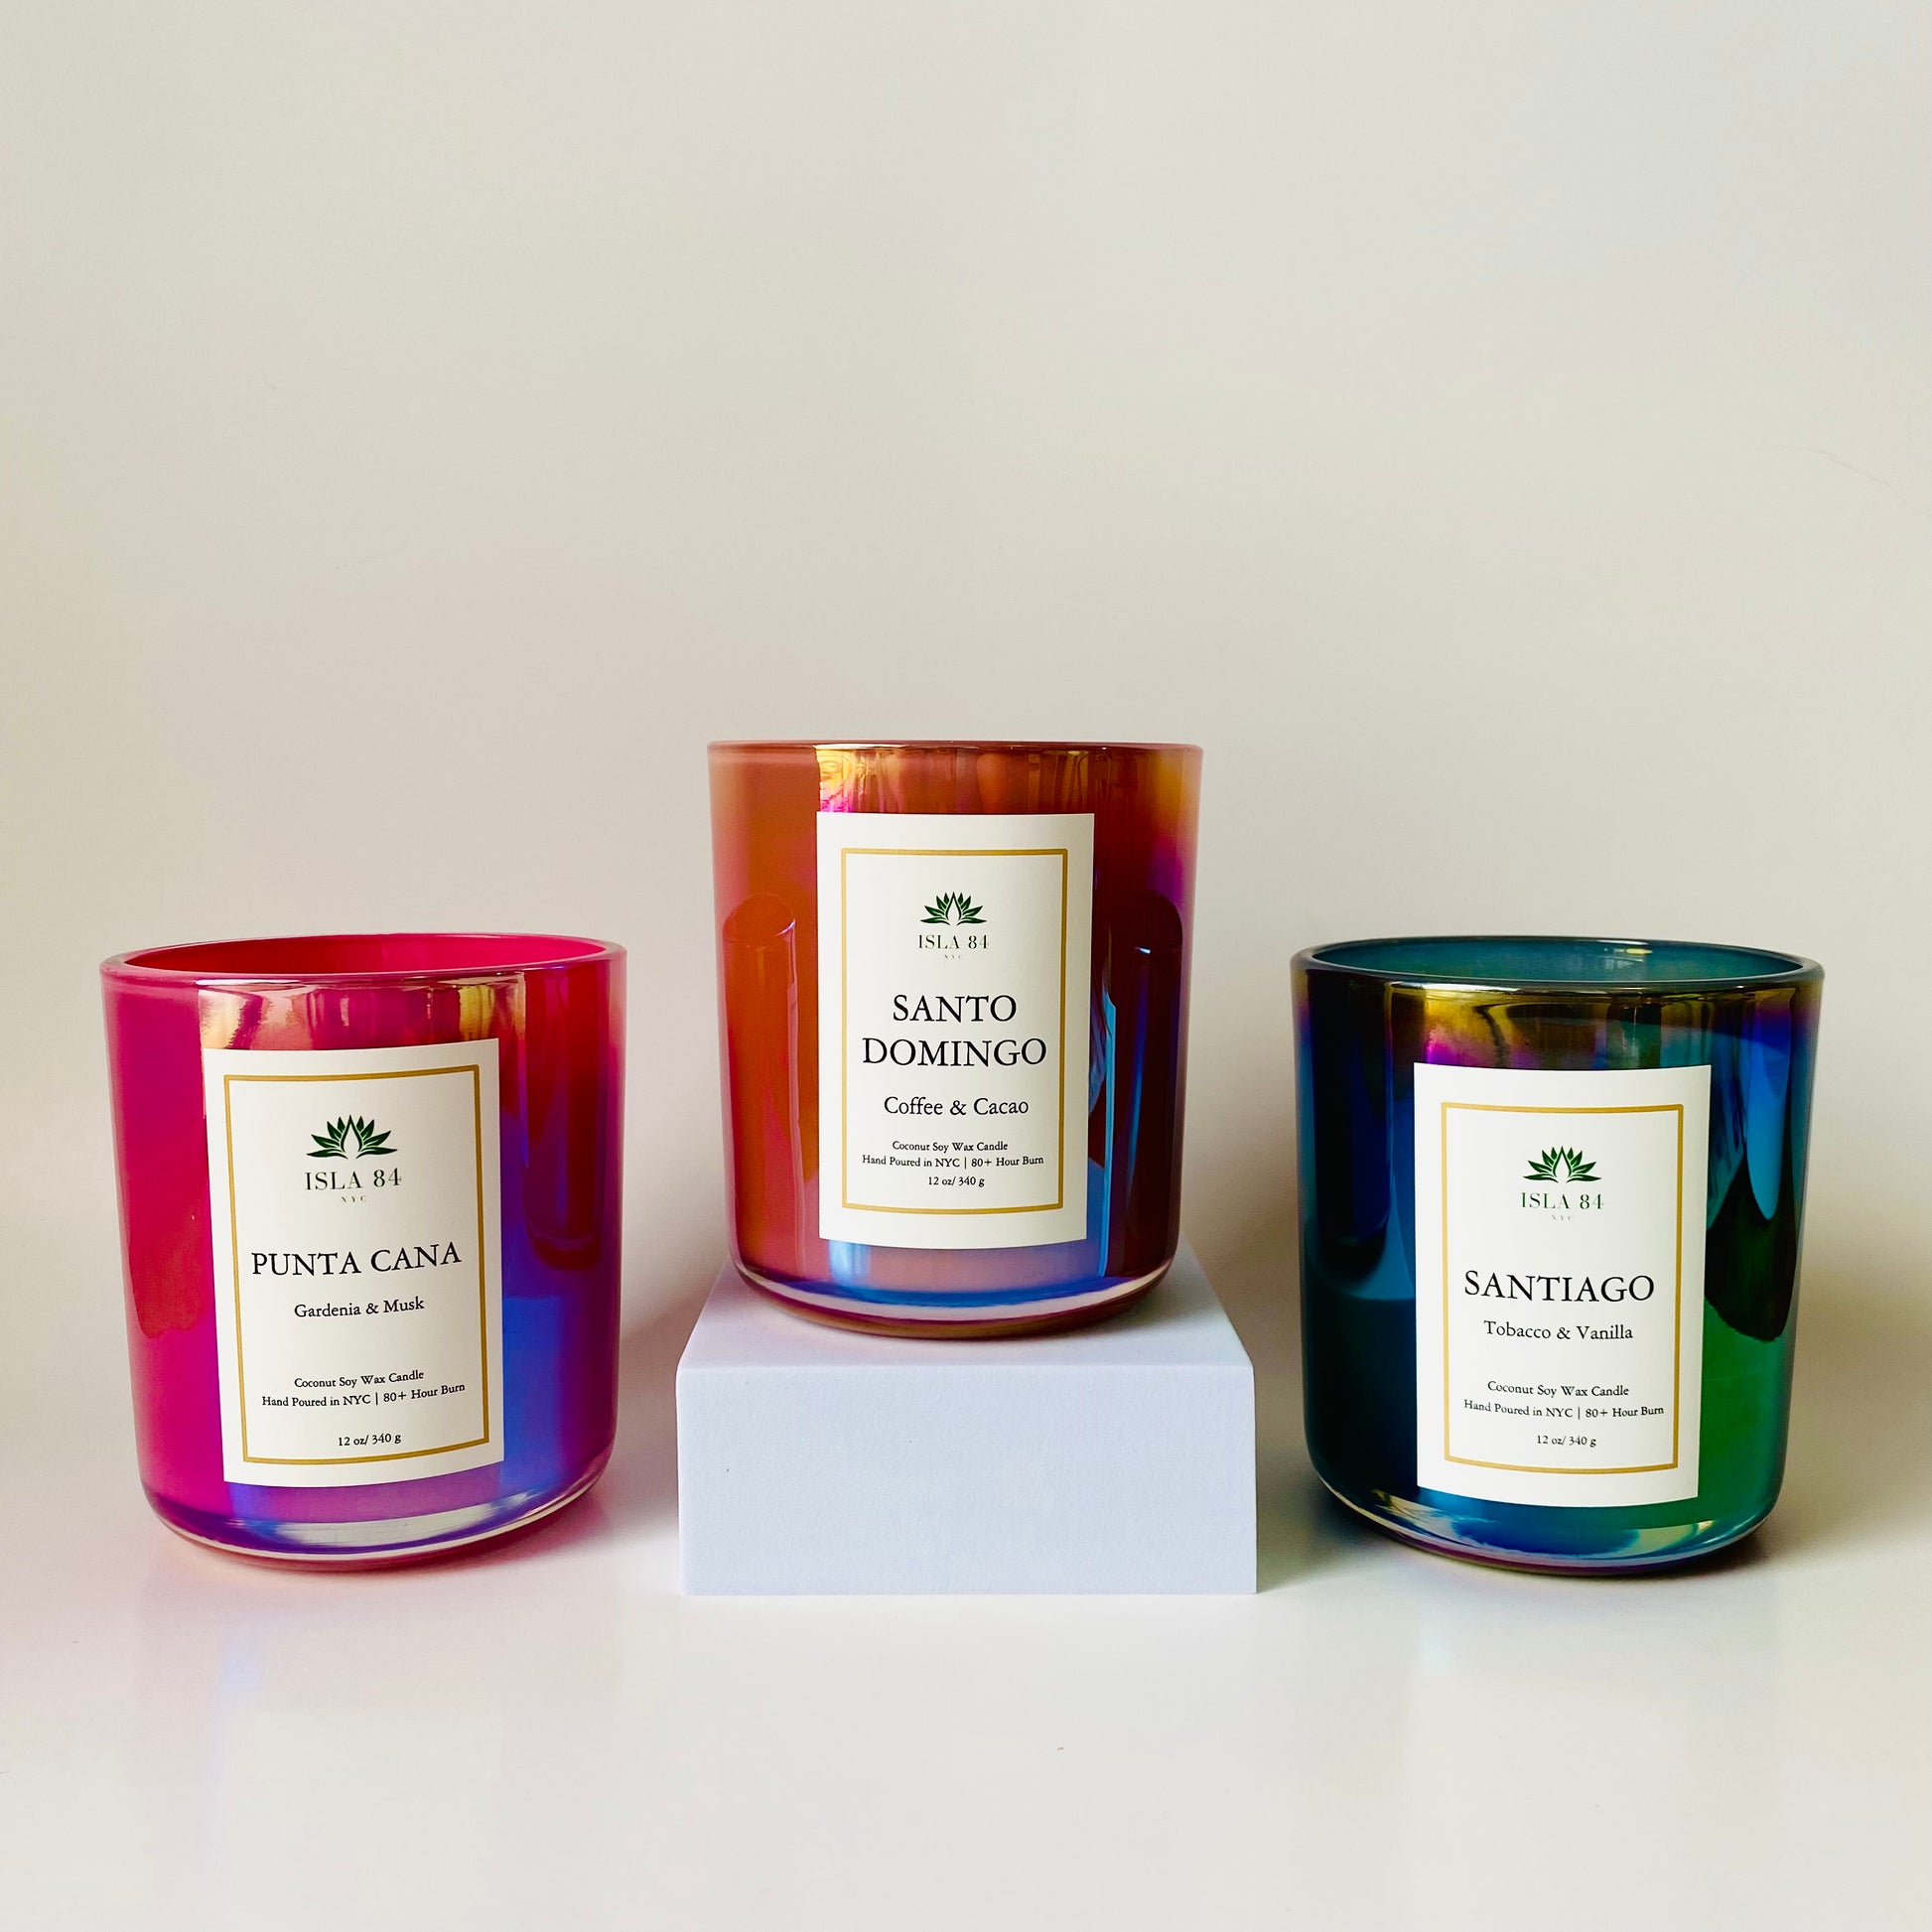 Punta Cana, Santo Domingo, and Santiago Signature Scented Candles; Dominican Candles; Latino Candles; DR Candles; Hot Pink, Brown and Black green vessels; Coconut Soy Wax Candles with Wood Wicks